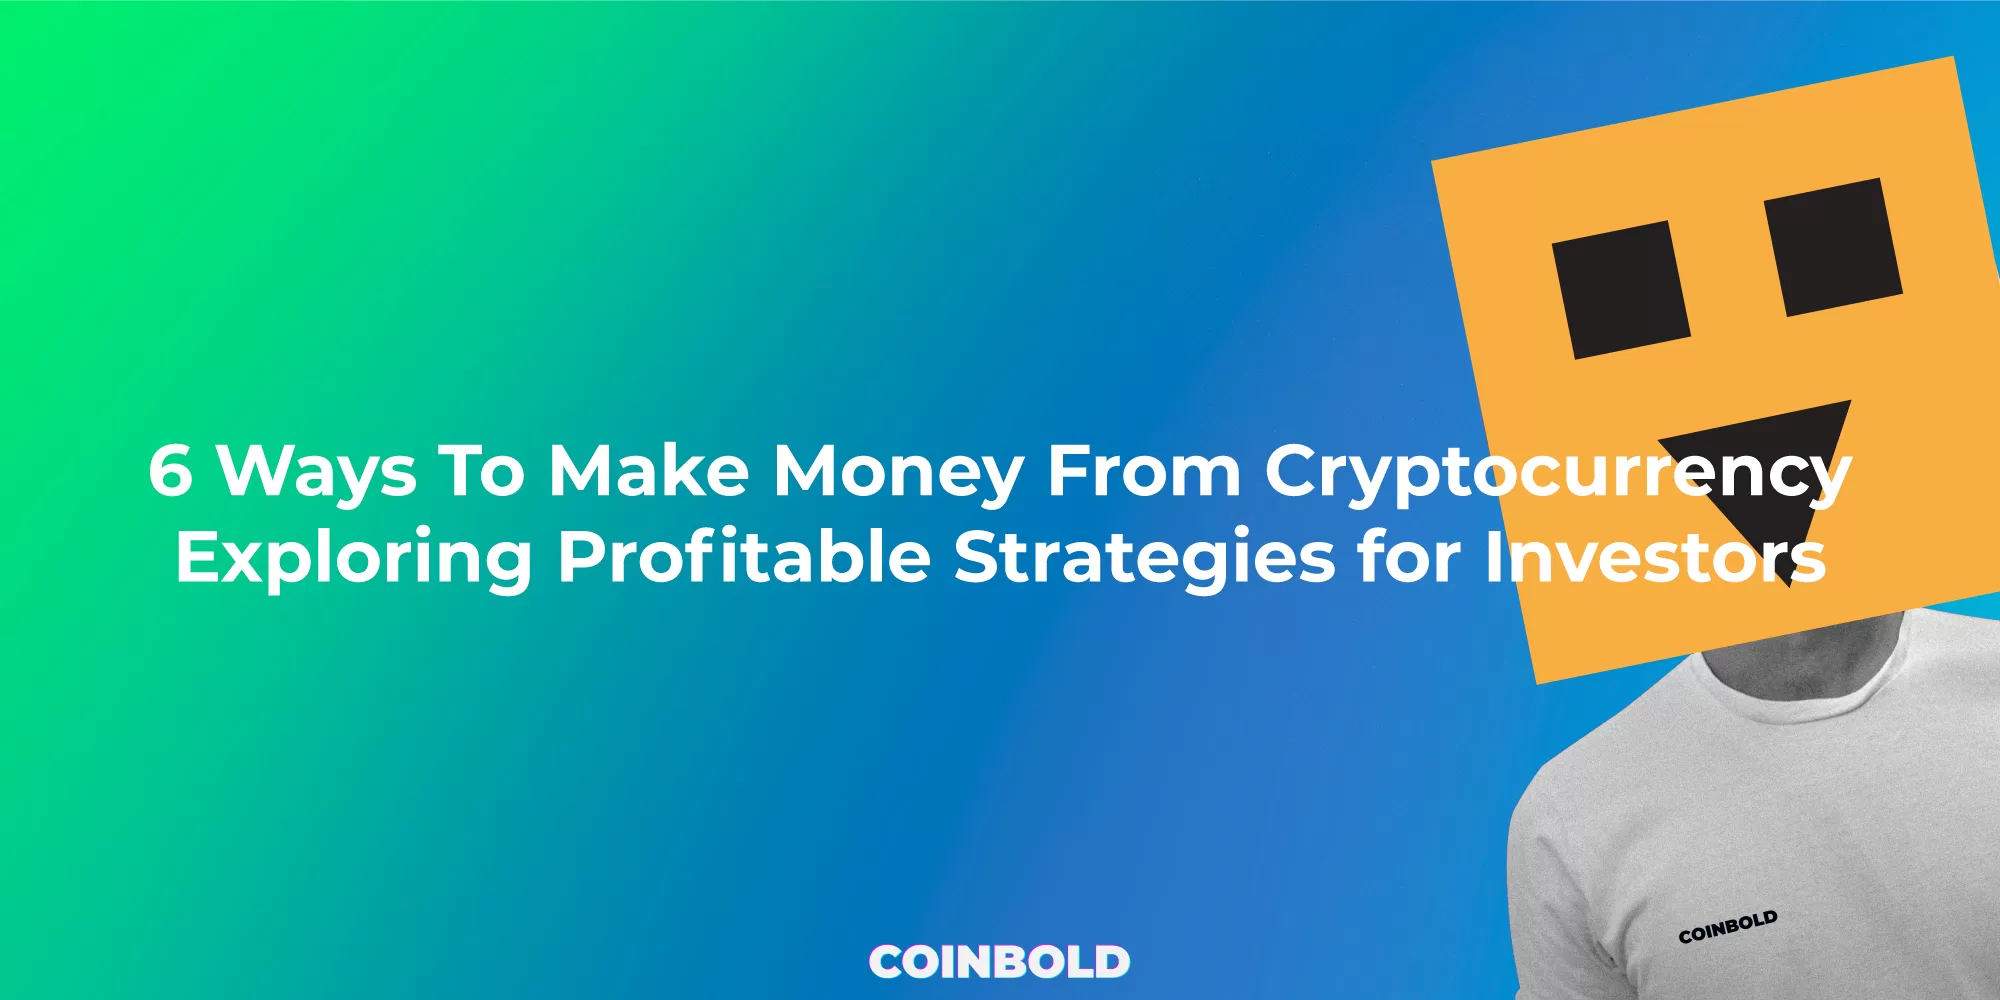 6 Ways To Make Money From Cryptocurrency: Exploring Profitable Strategies for Investors